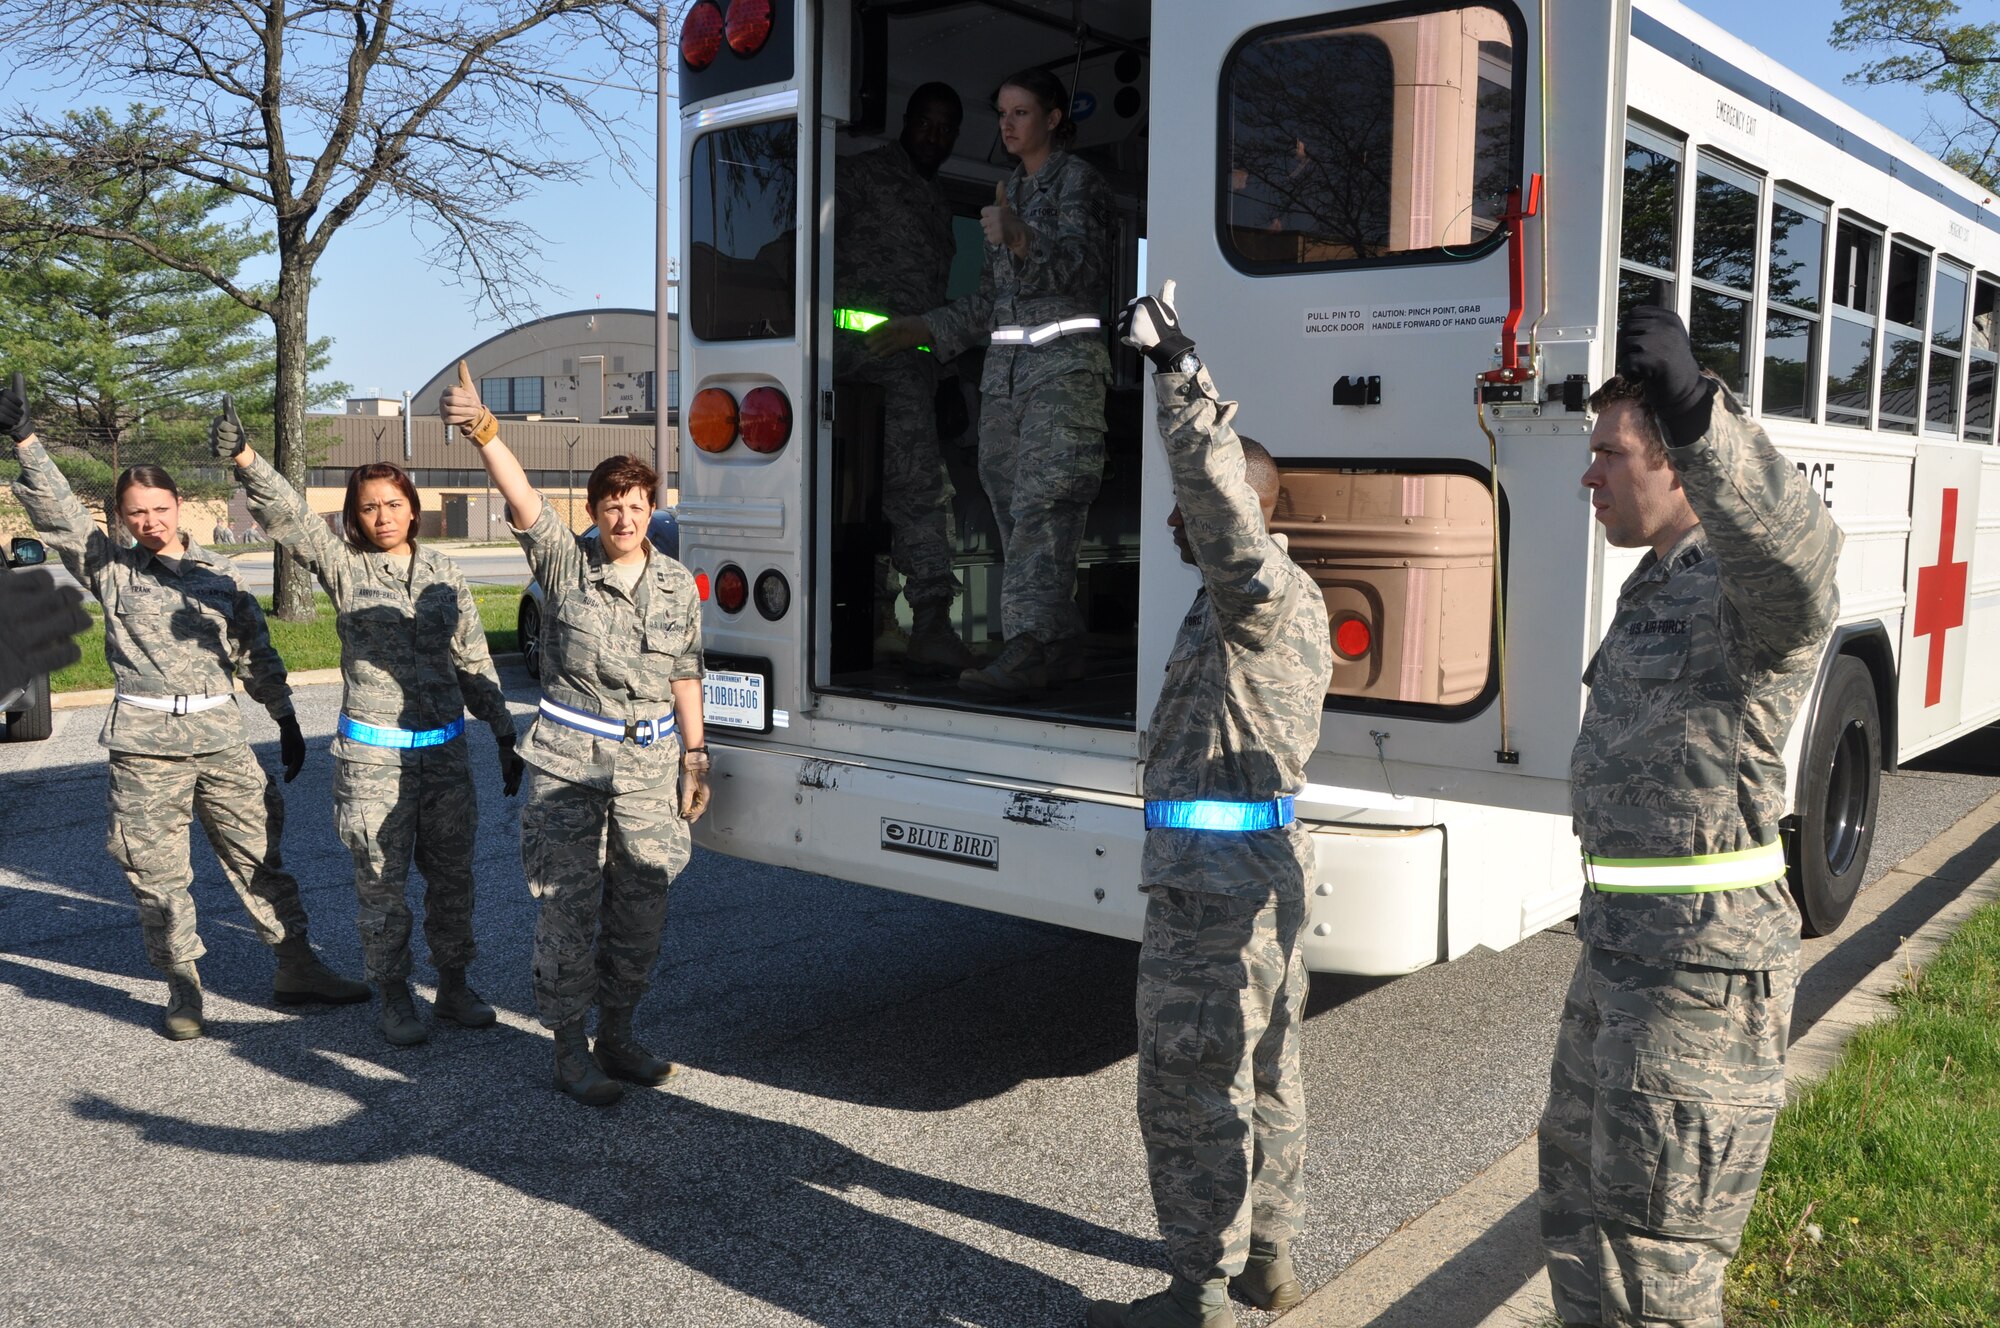 Members of the 459th Aeromedical Staging Squadron signal that they are ready to receive patients from the incoming bus. The exercise mimicked emergency medical situation in the event of a disaster at Joint Base Andrews on Monday, May 4, 2015 (Air Force Photo / Senior Airman Kristin Kurtz)